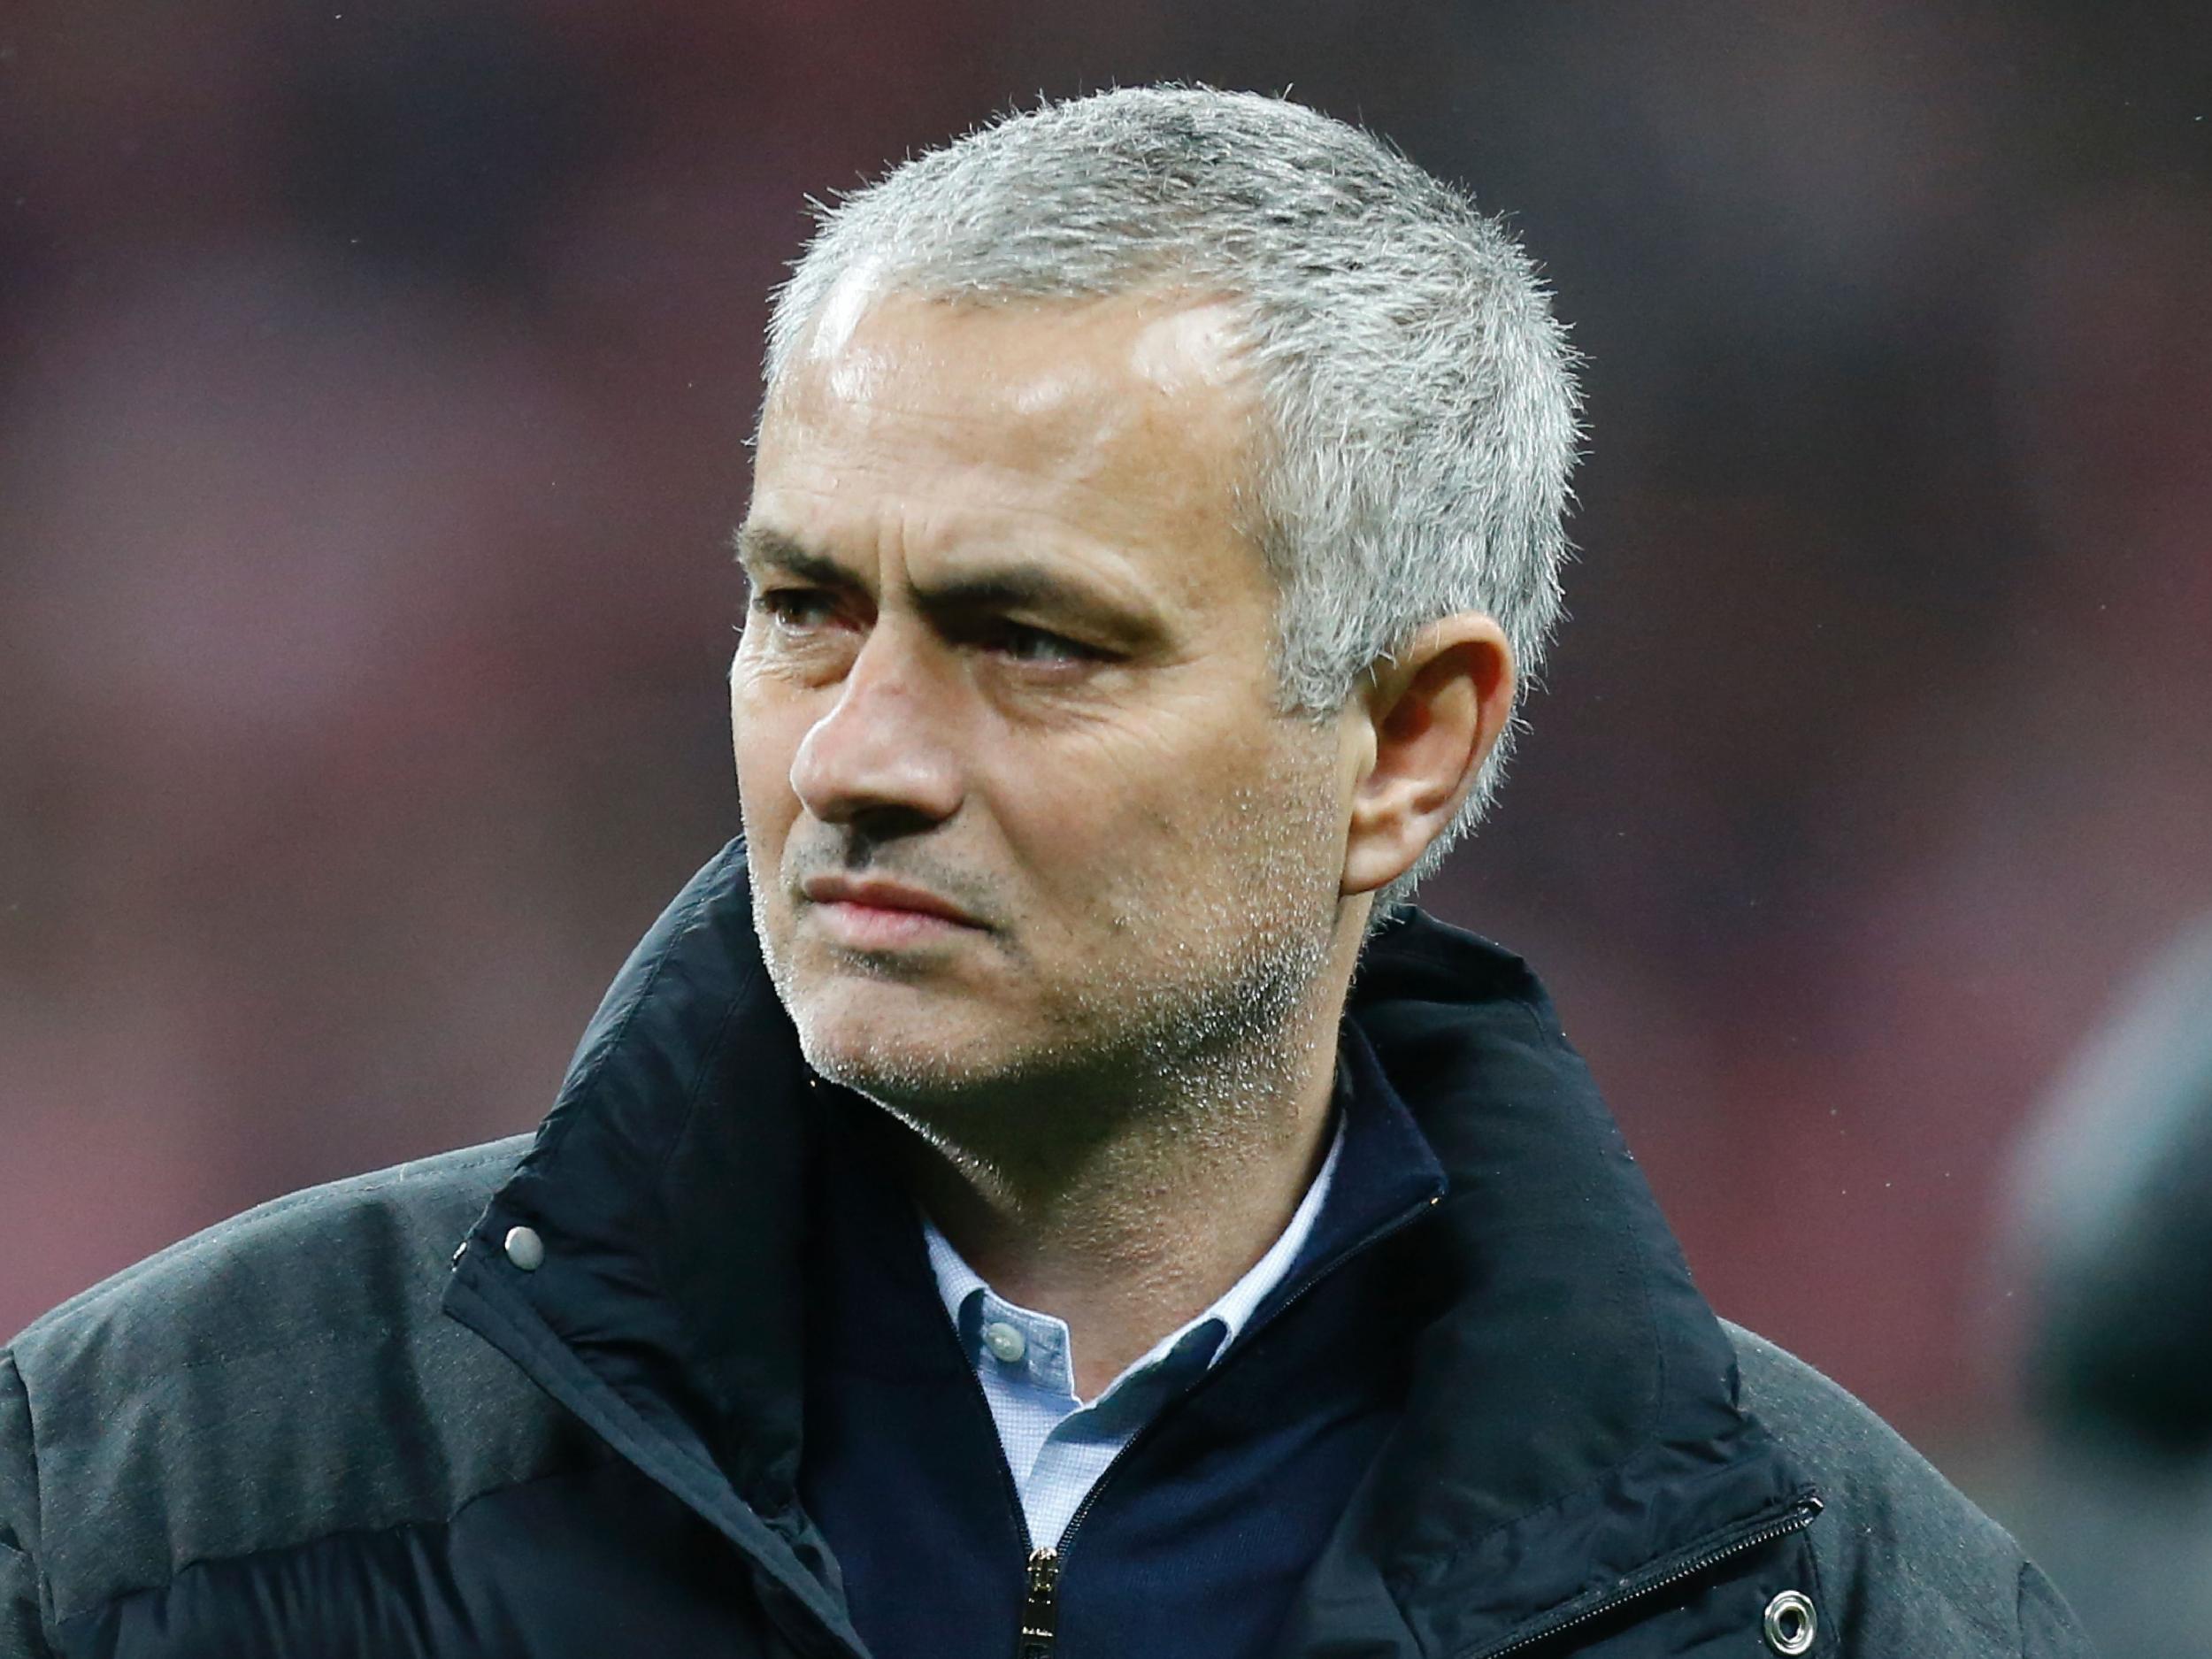 Mourinho became the first United manager to win a major trophy in his first season last weekend